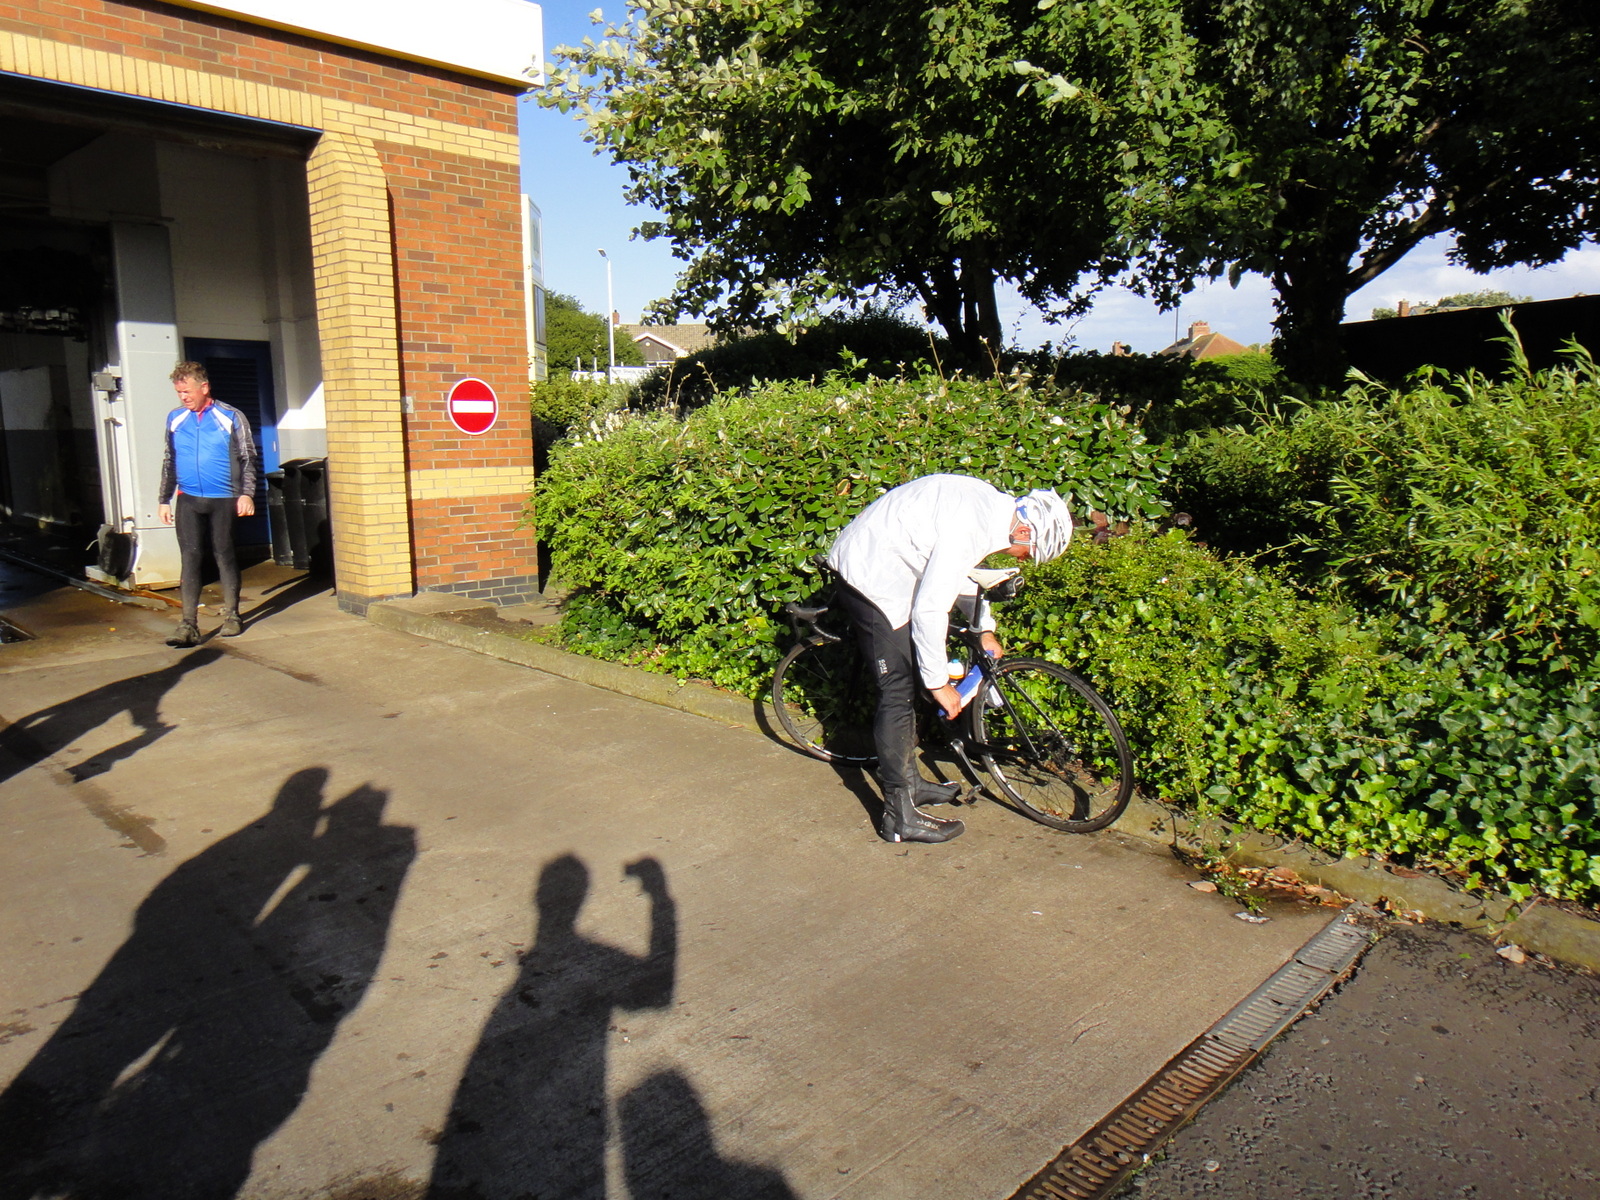 Damien and my determination to properly clean our bikes at the end amused the others greatly :-)